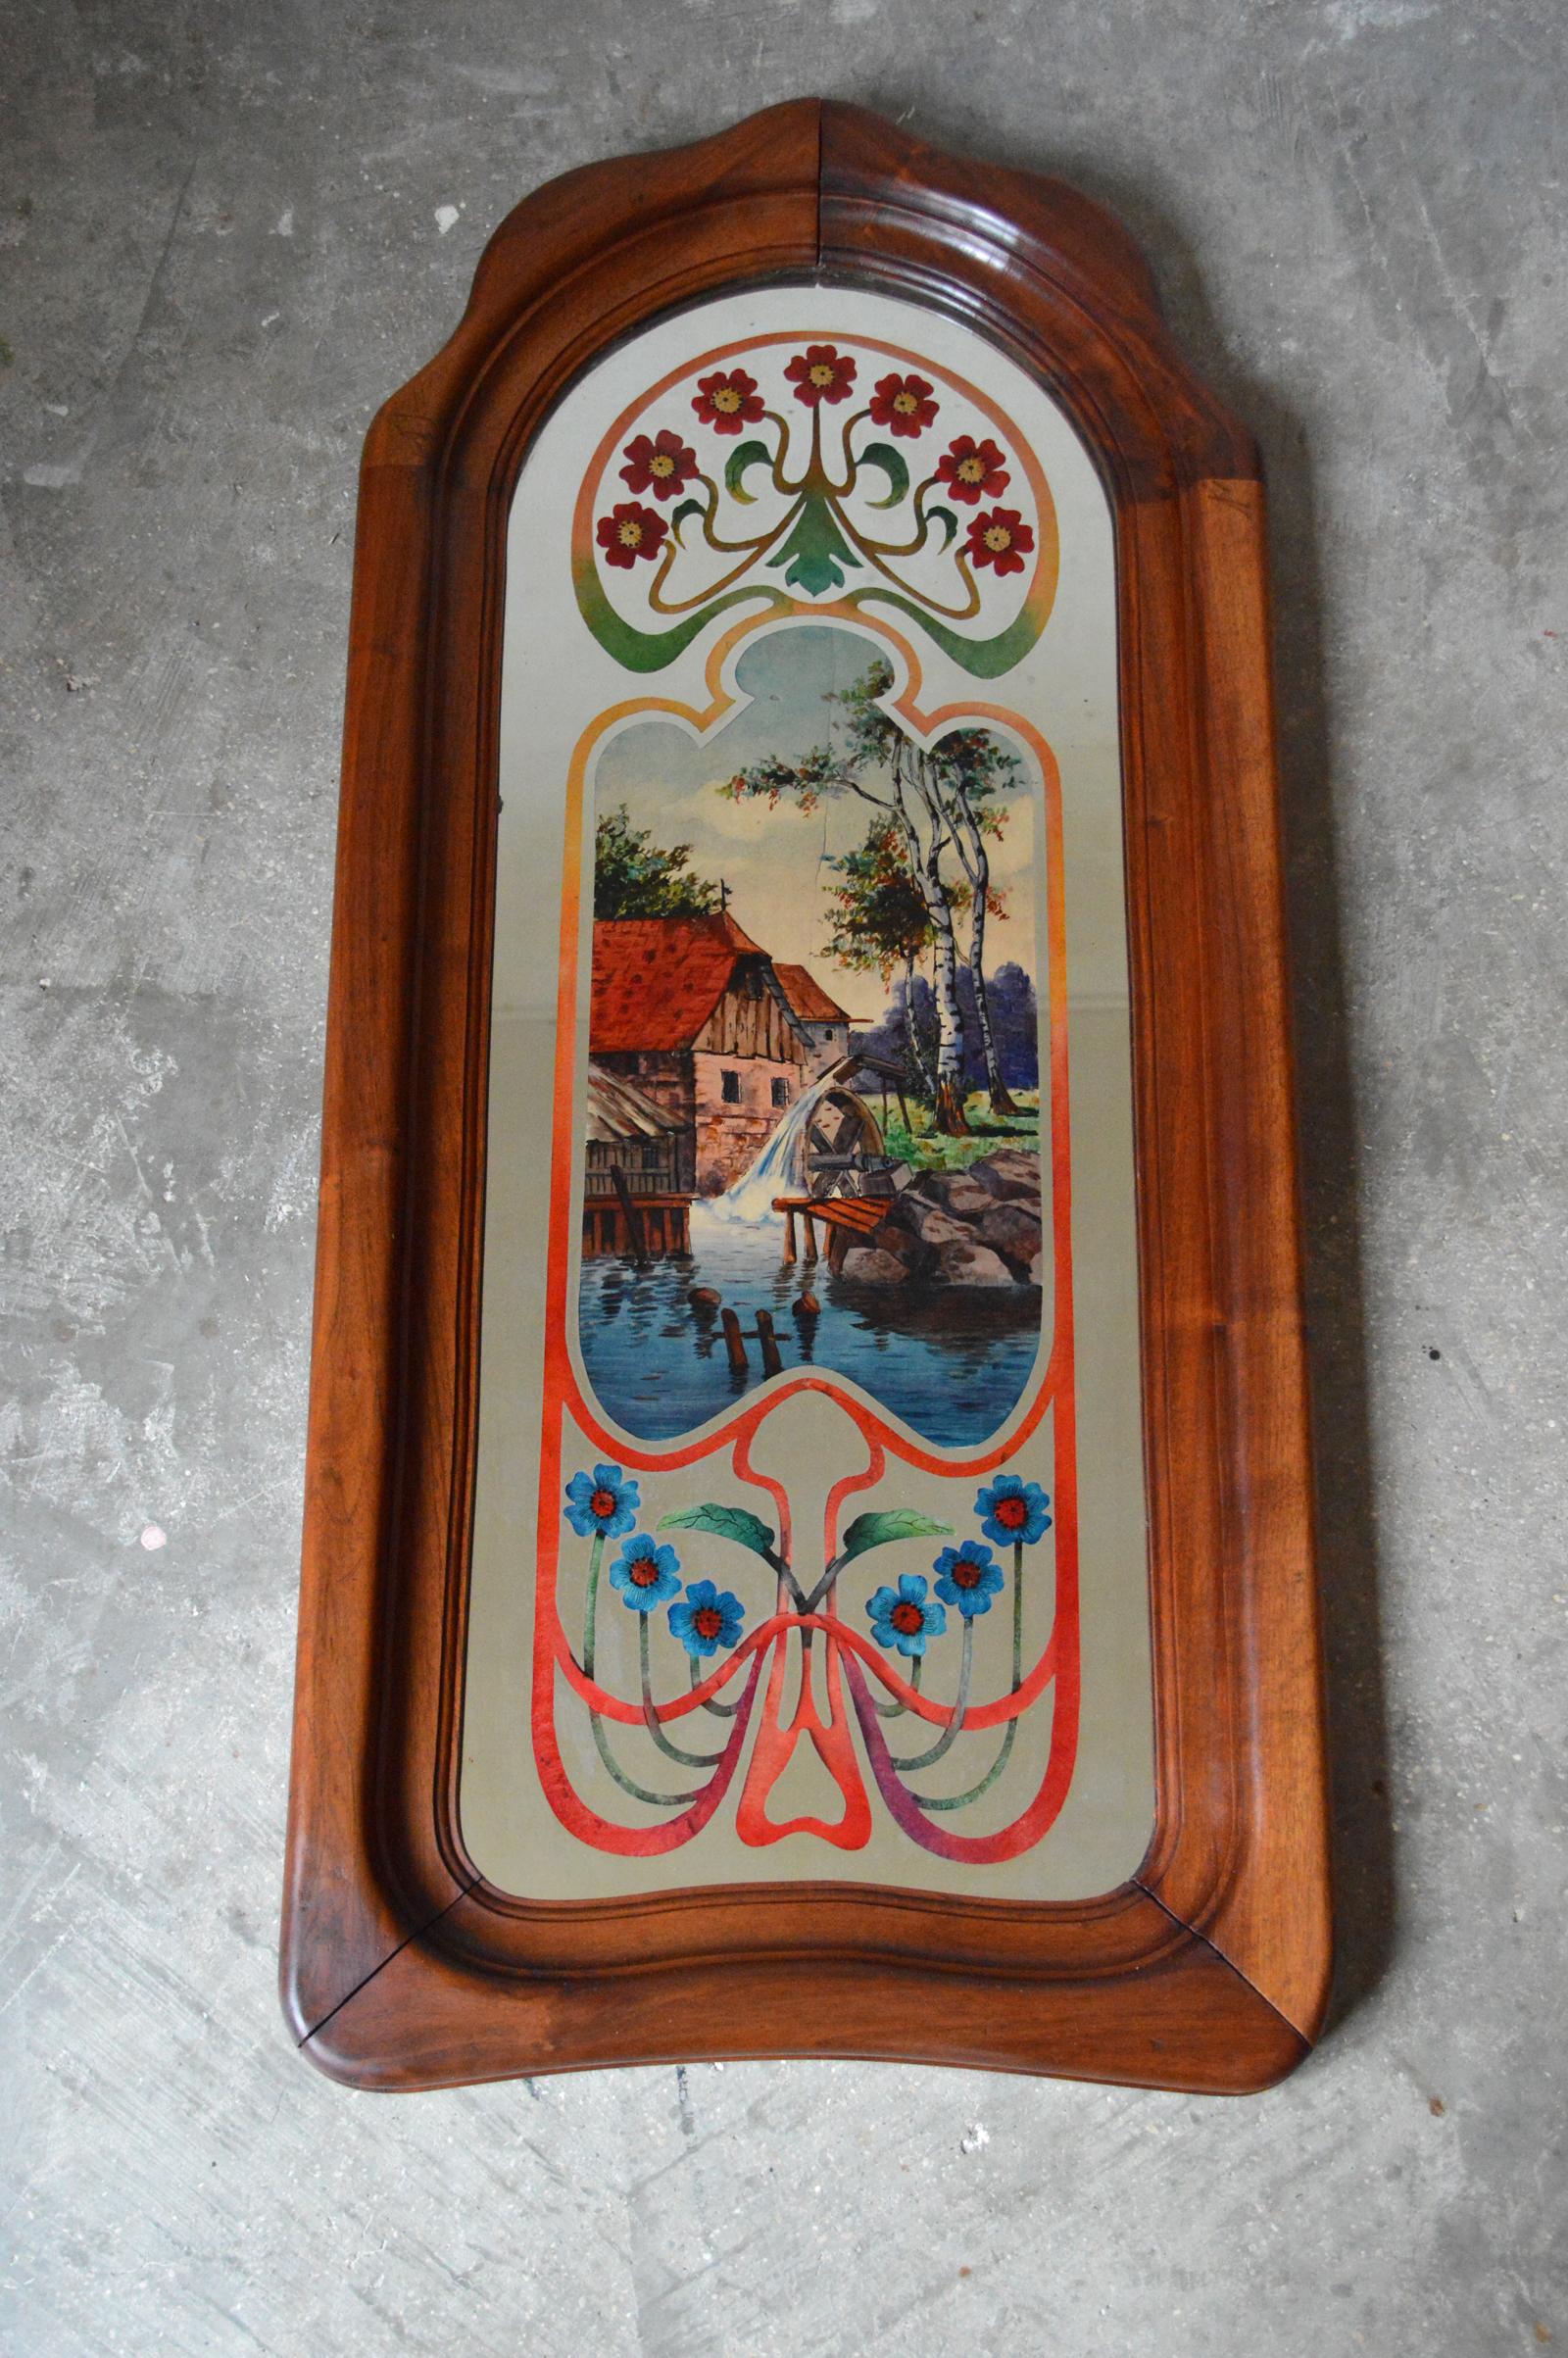 Wonderful mirror.

Carved solid walnut frame. The mirror is hand painted under the glass. The painting represents a landscape, there is a water mill. There are also flowers and shade variations.

Art Nouveau, circa 1900.

Beautiful